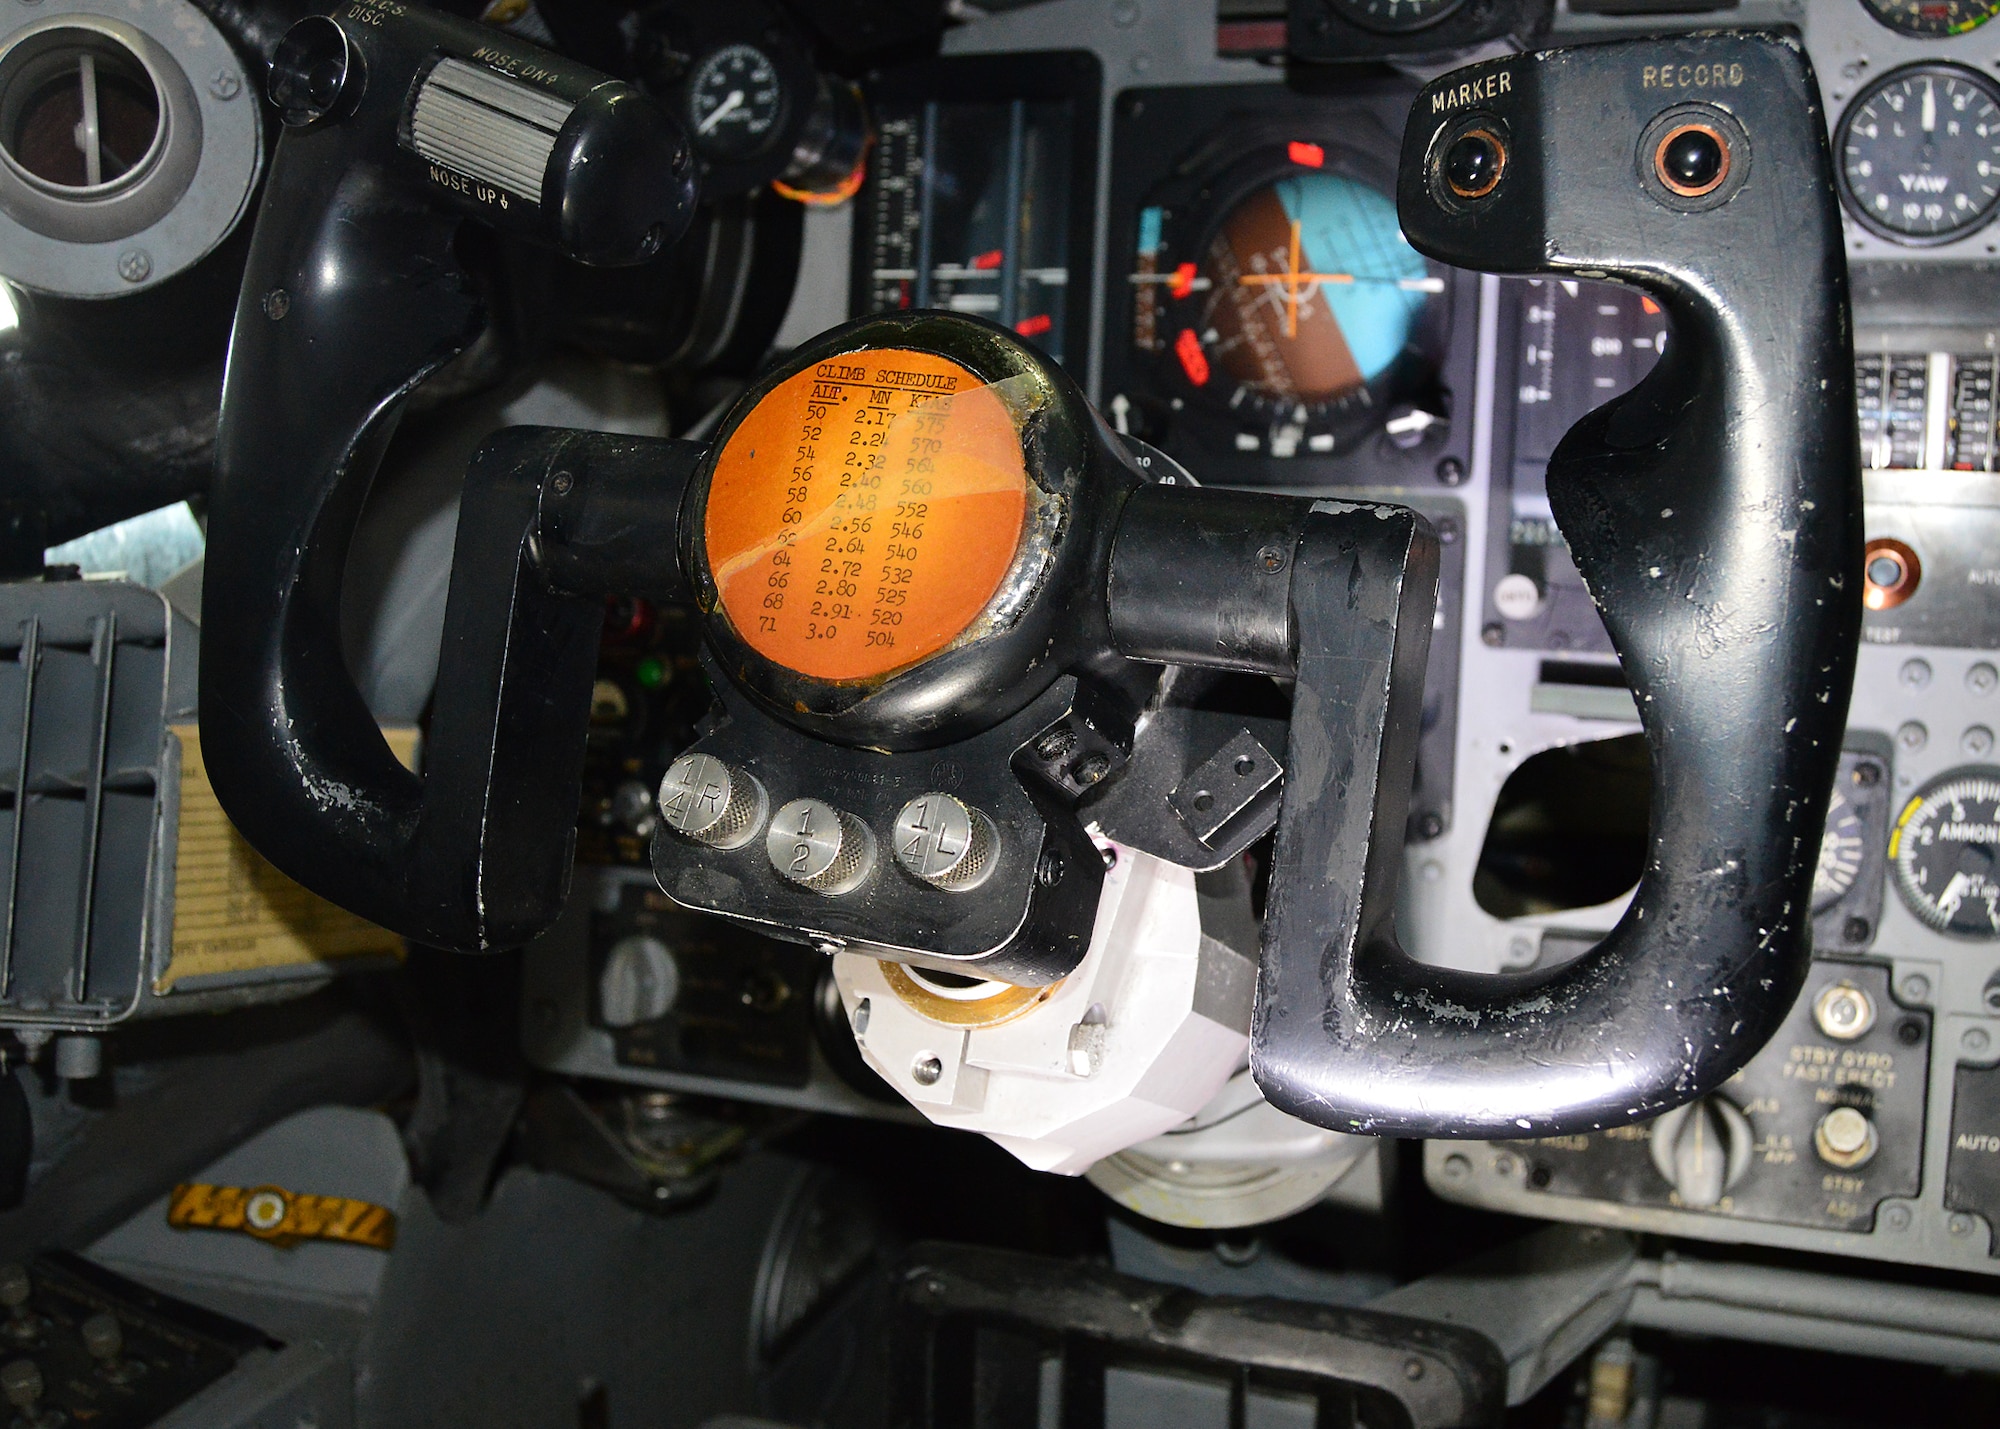 DAYTON, Ohio - North American XB-70 cockpit at the National Museum of the U.S. Air Force. (U.S. Air Force photo by Ken LaRock) 


